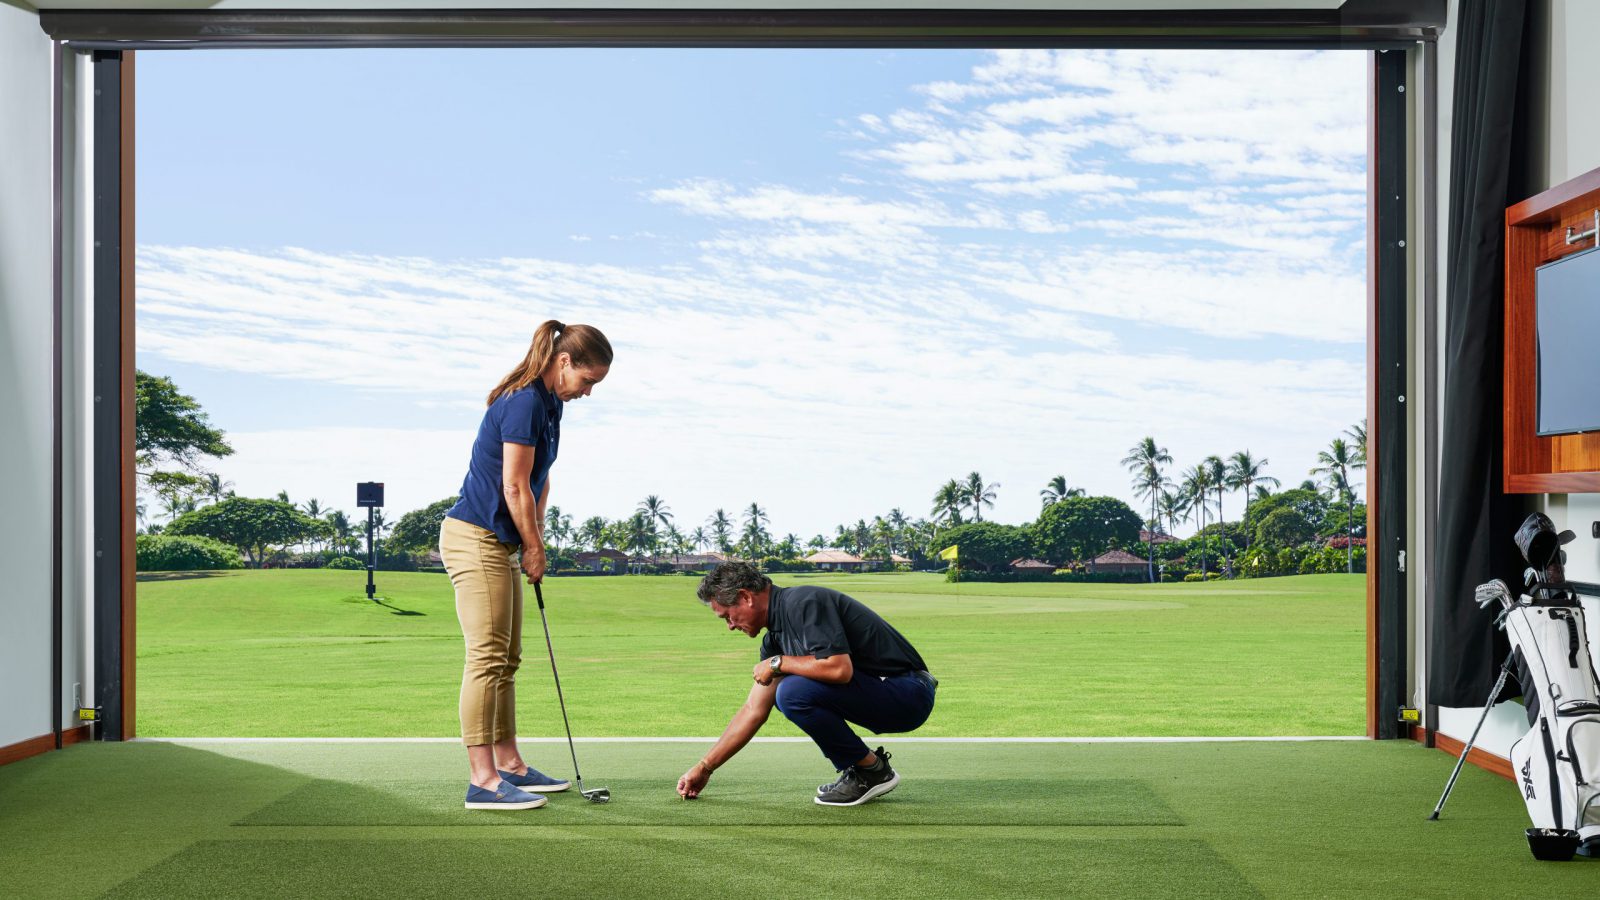 An instructor places a tee on the indoor golf turf while the person taking the lesson readies her swing.